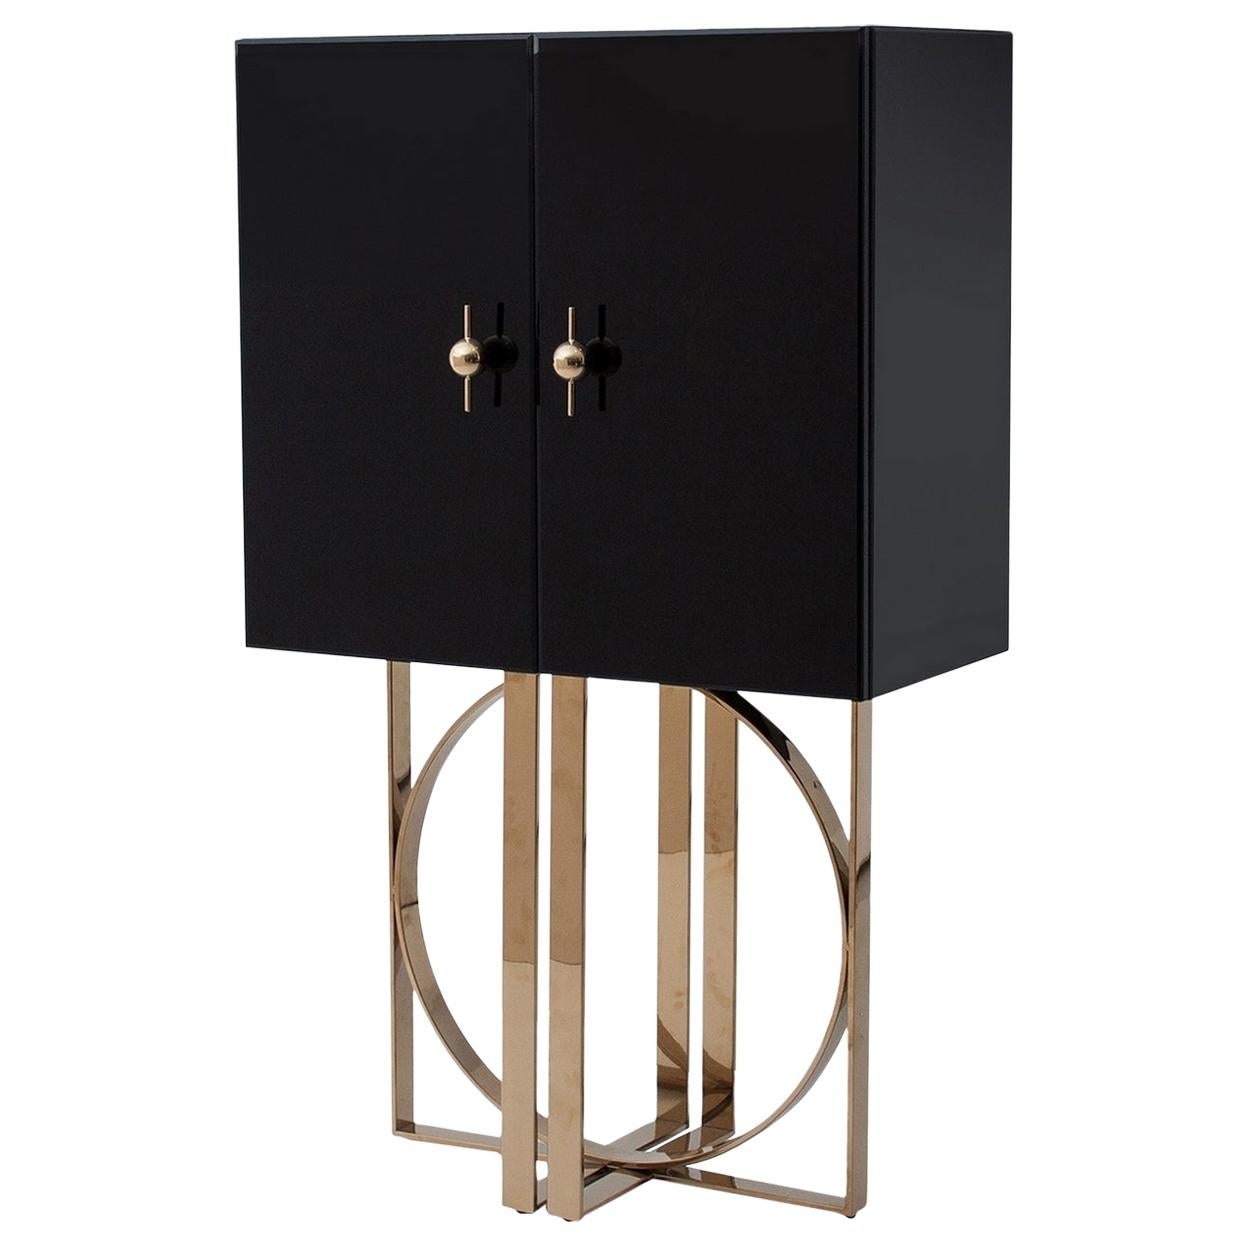 Black Bevelled Mirrored and Gilded Finishes Bar Cabinet